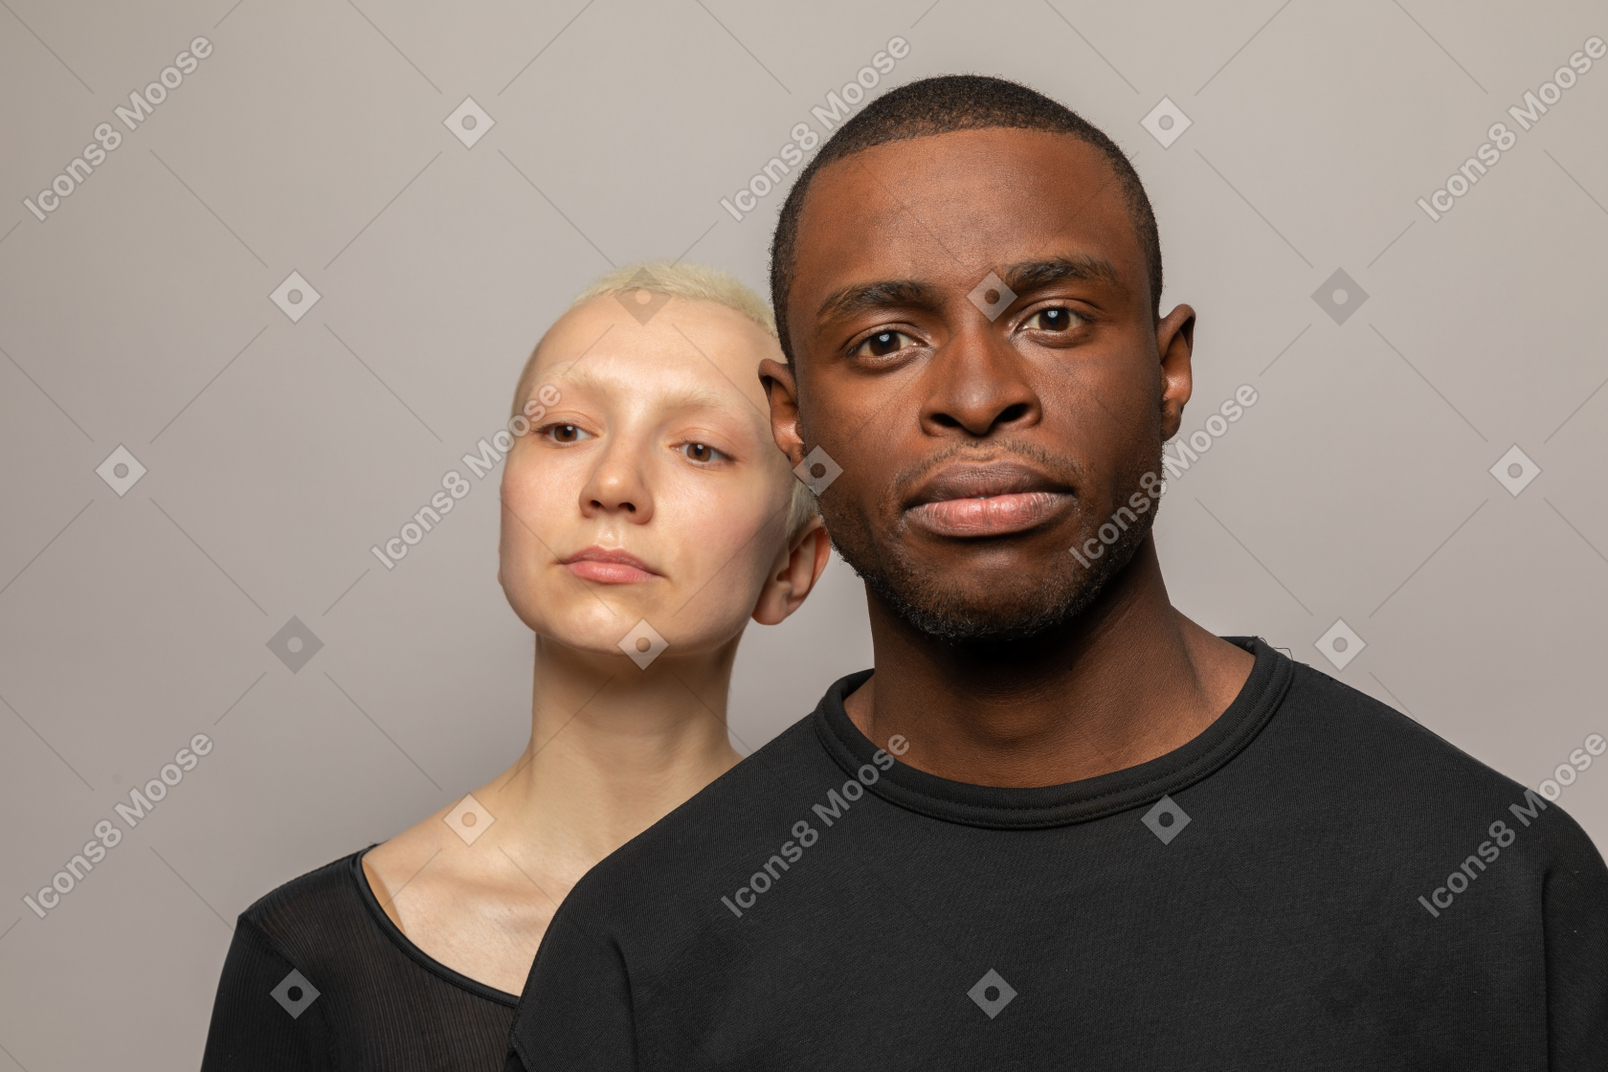 Young man in front woman looking at camera